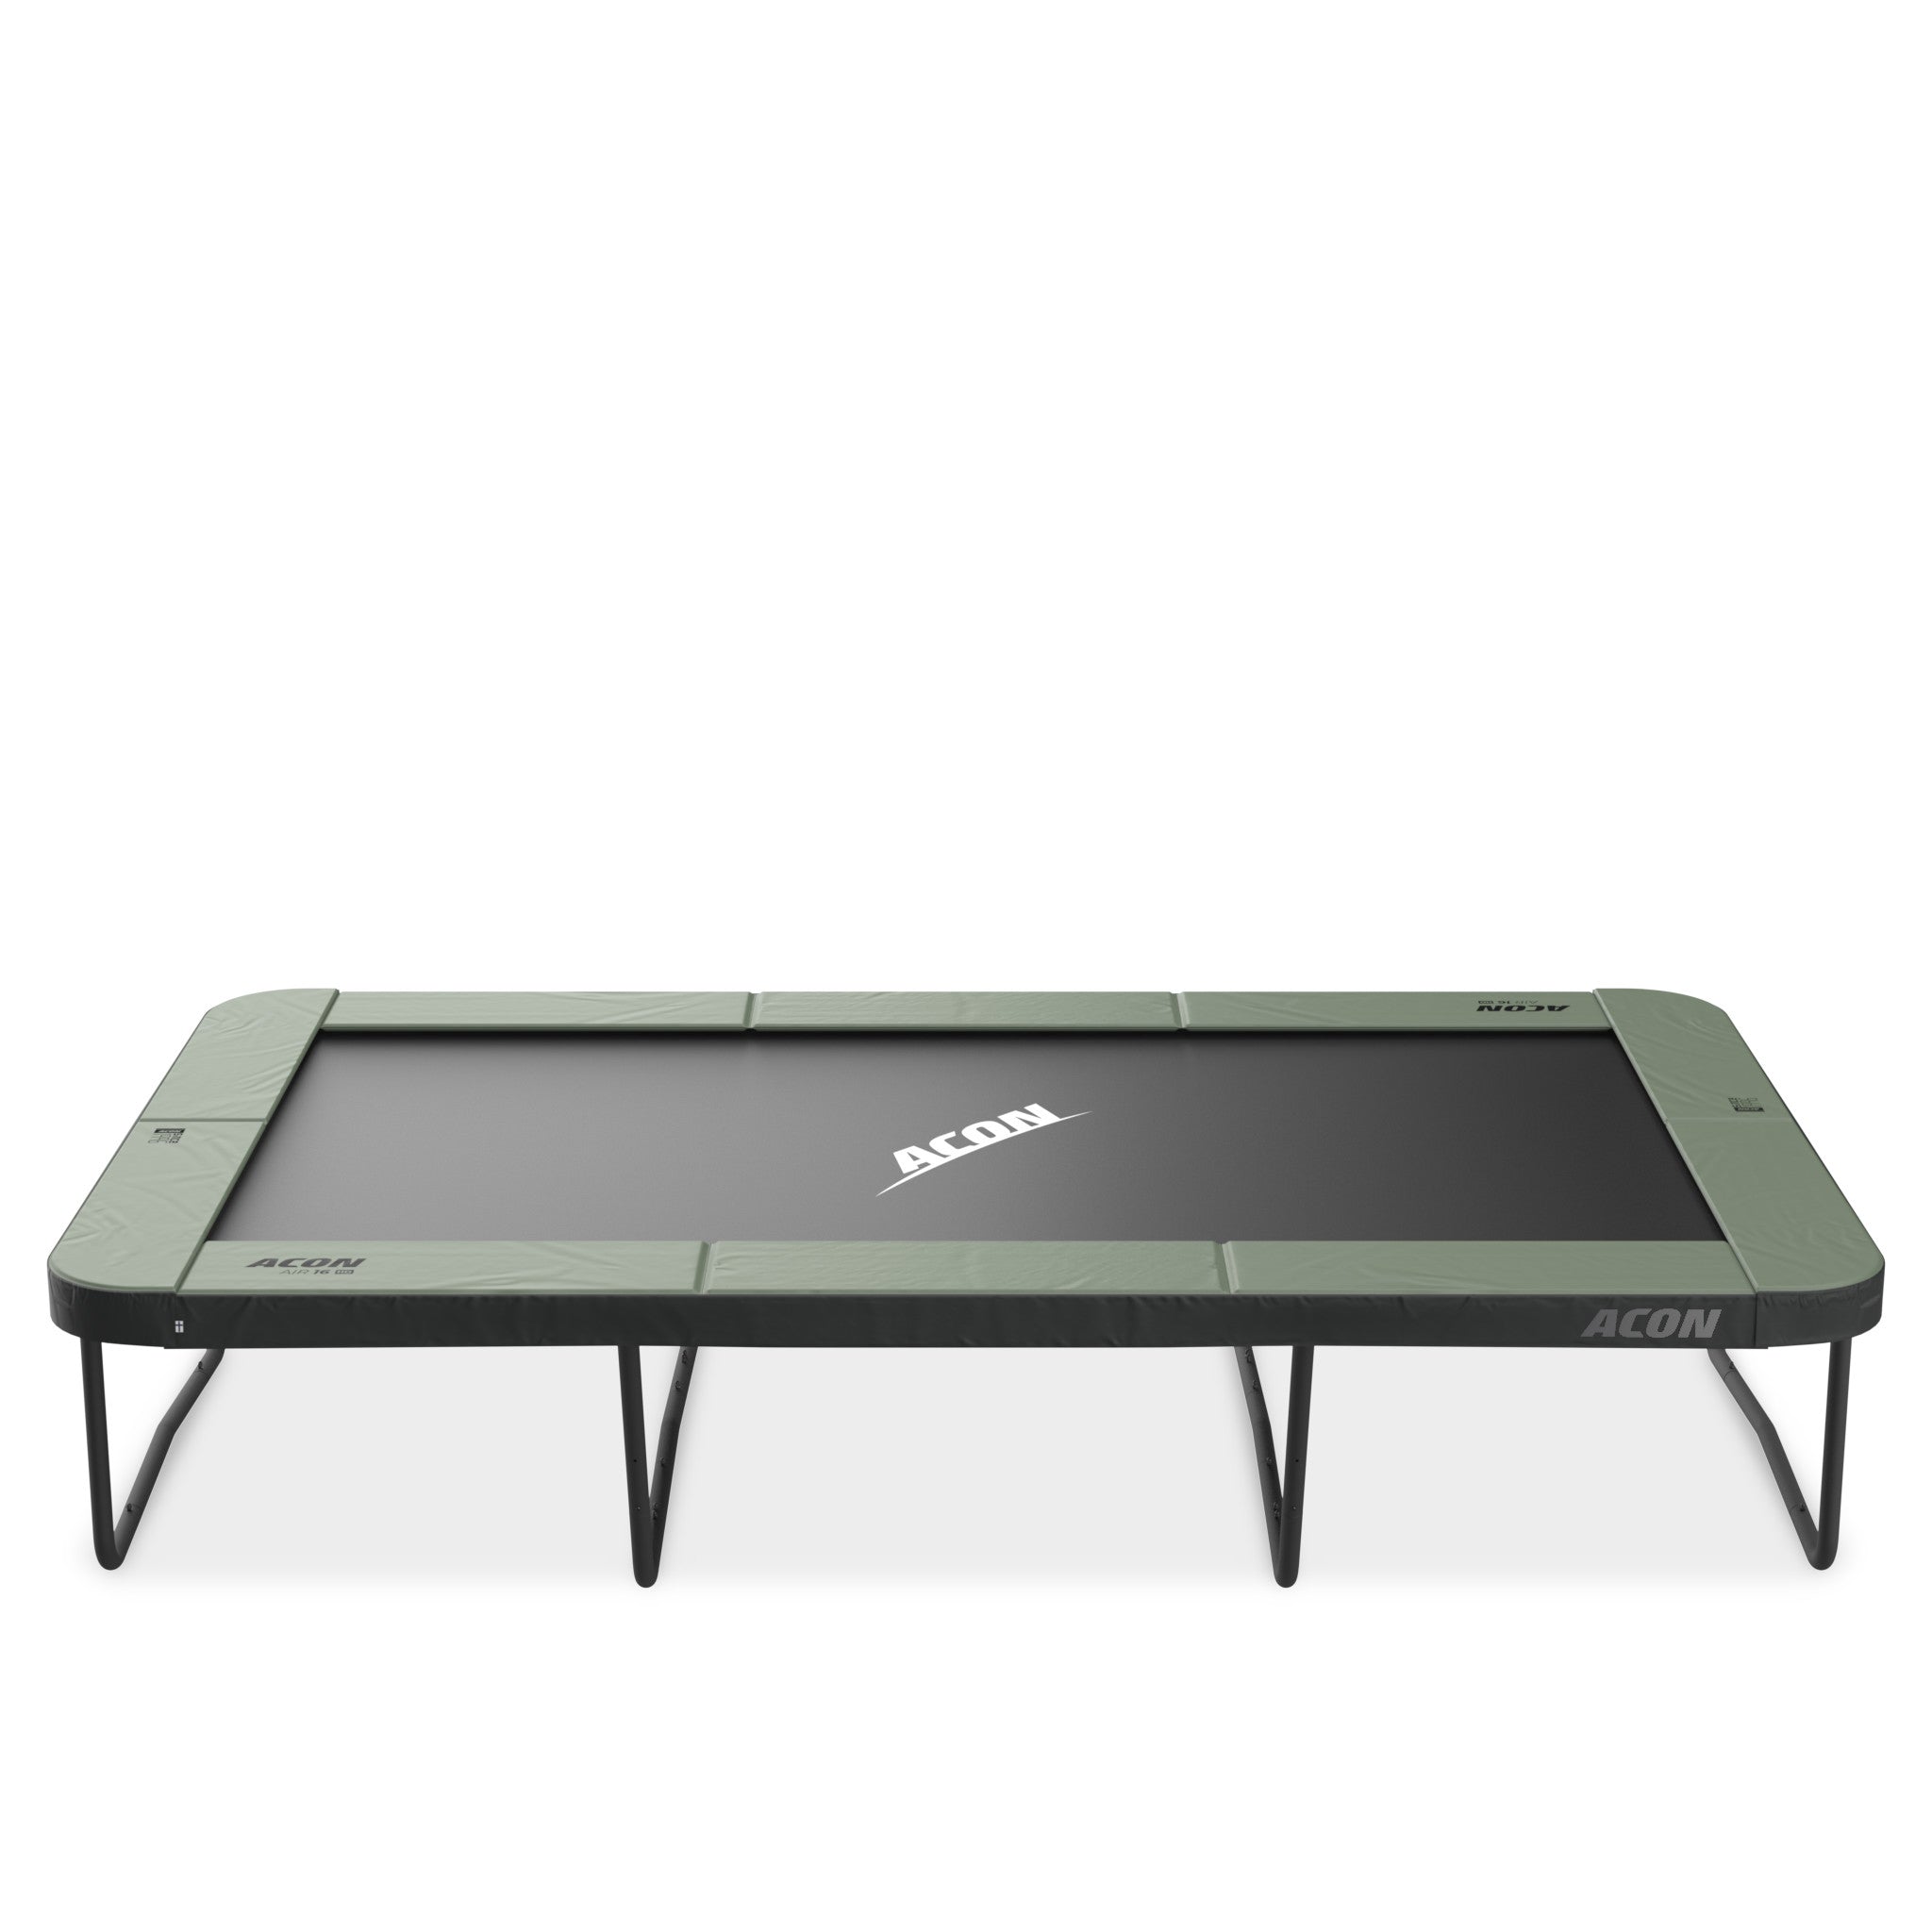 ACON Air 16 HD Trampoline with ladder